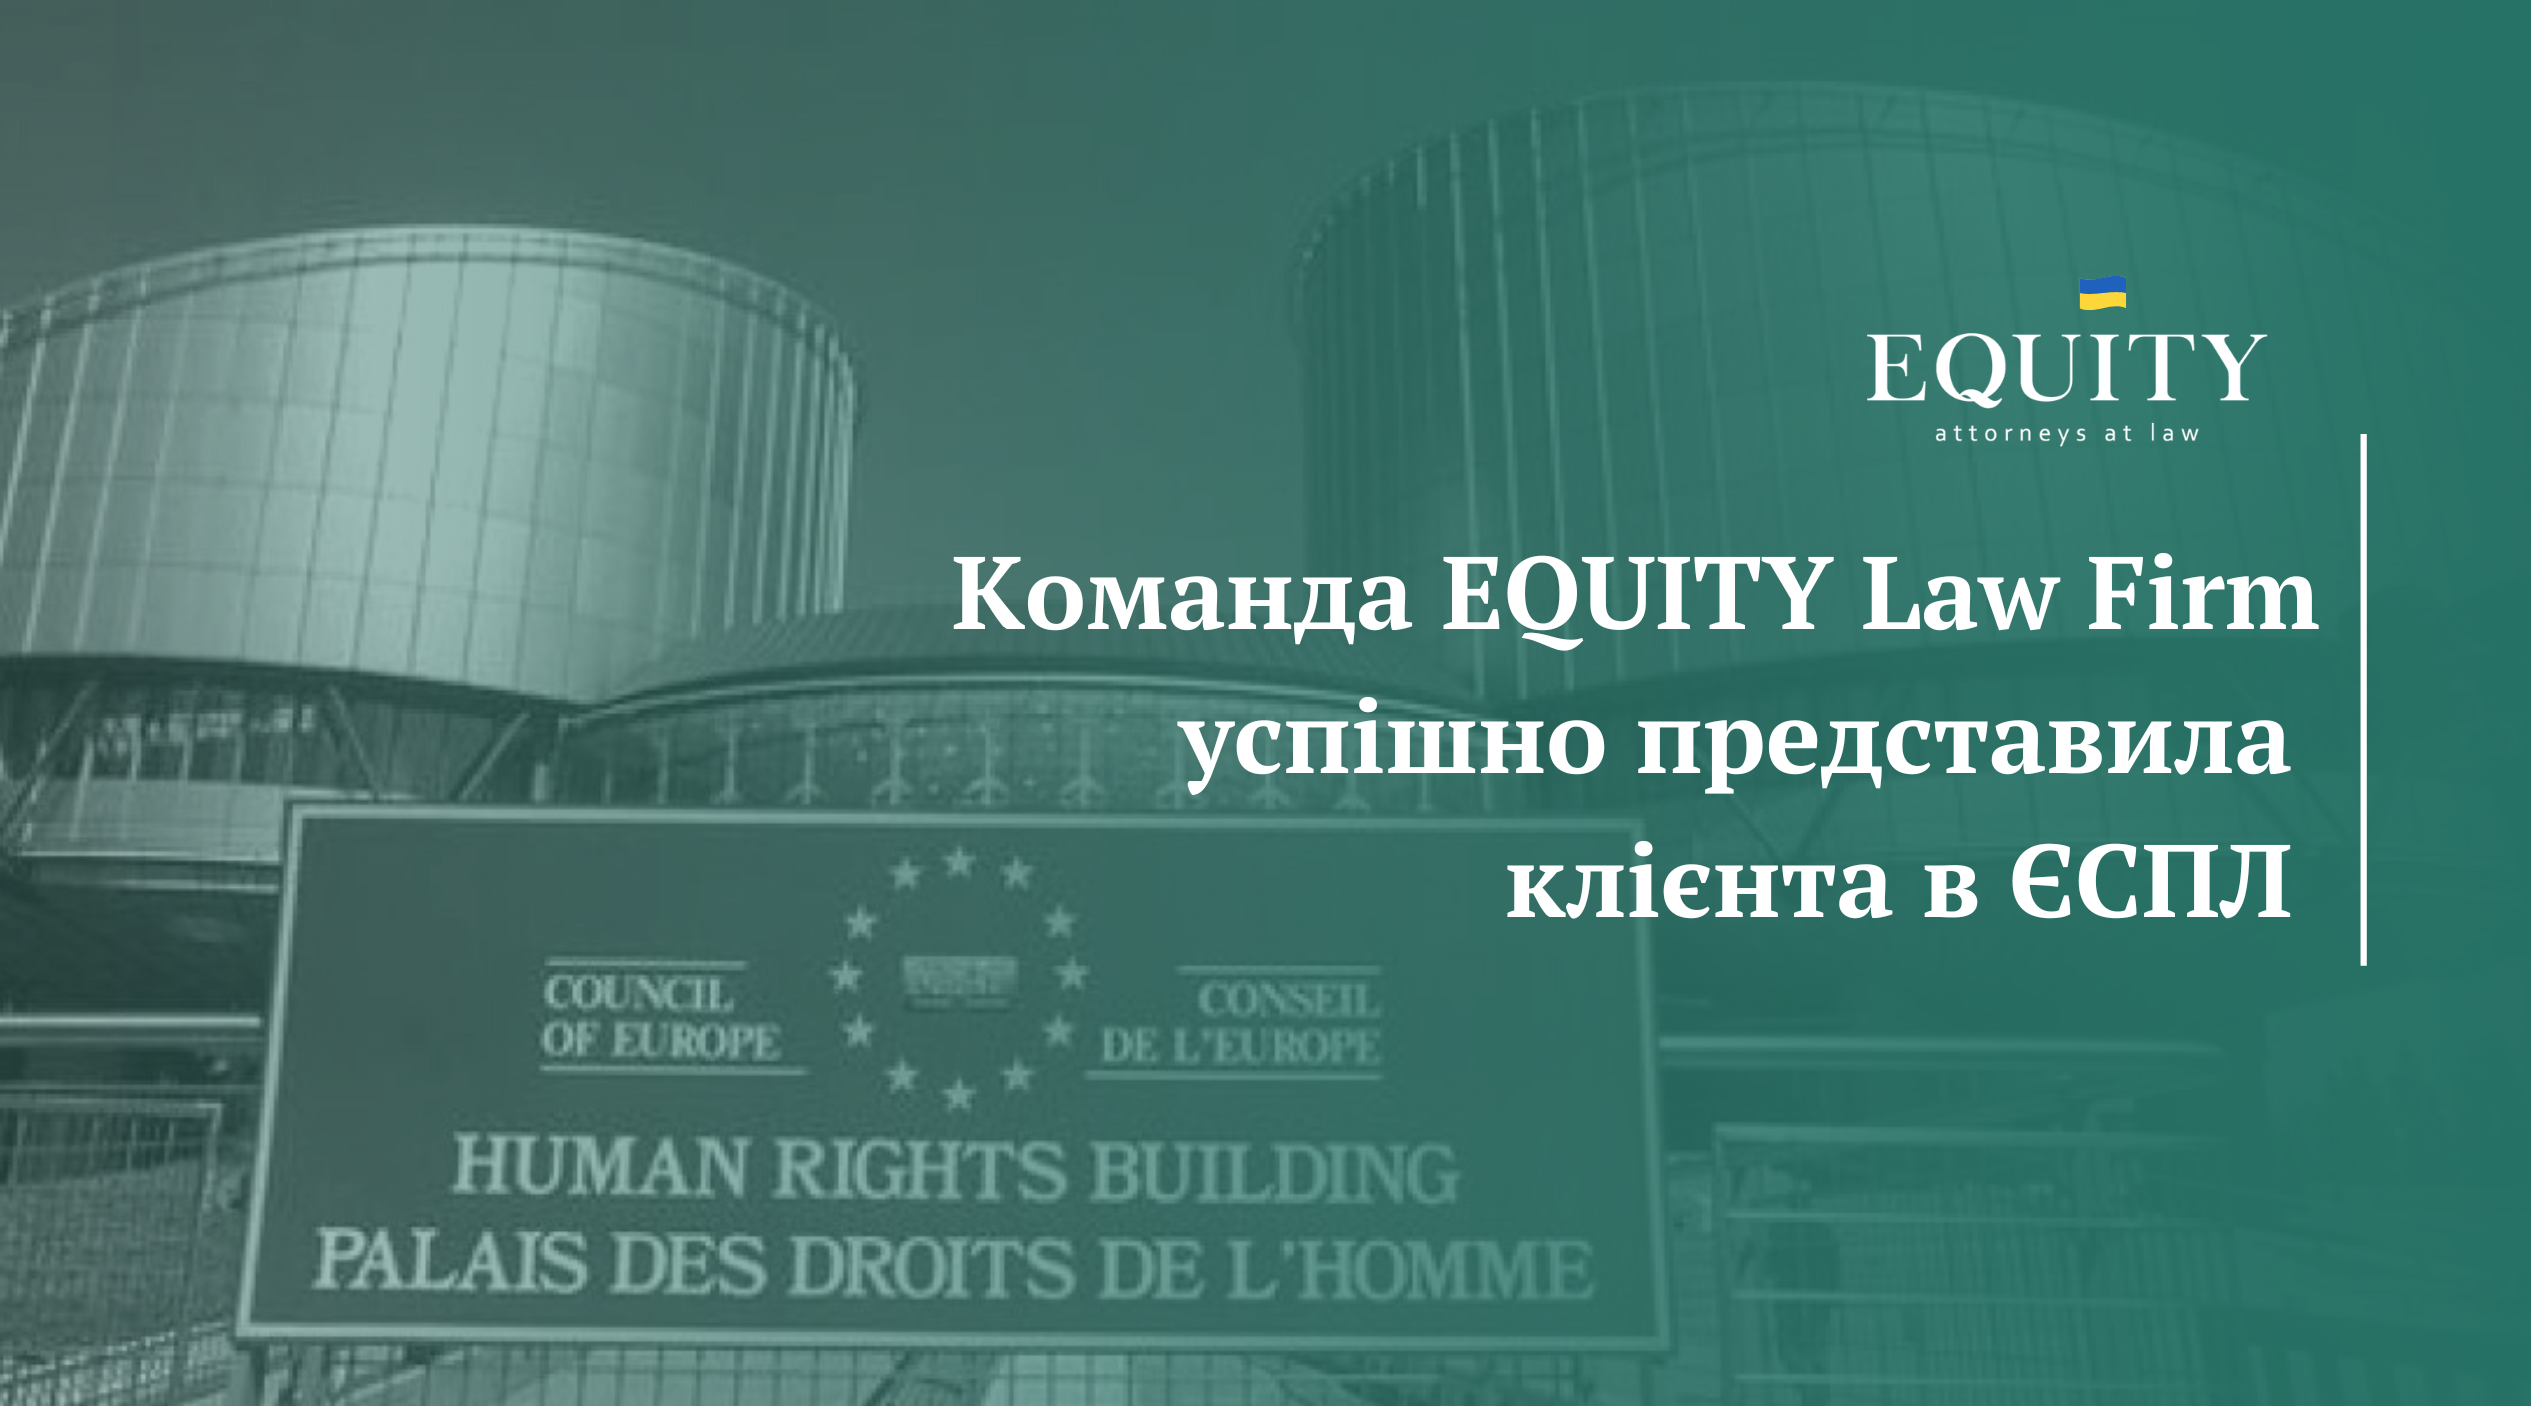 One more victory of EQUITY team in the ECHR!